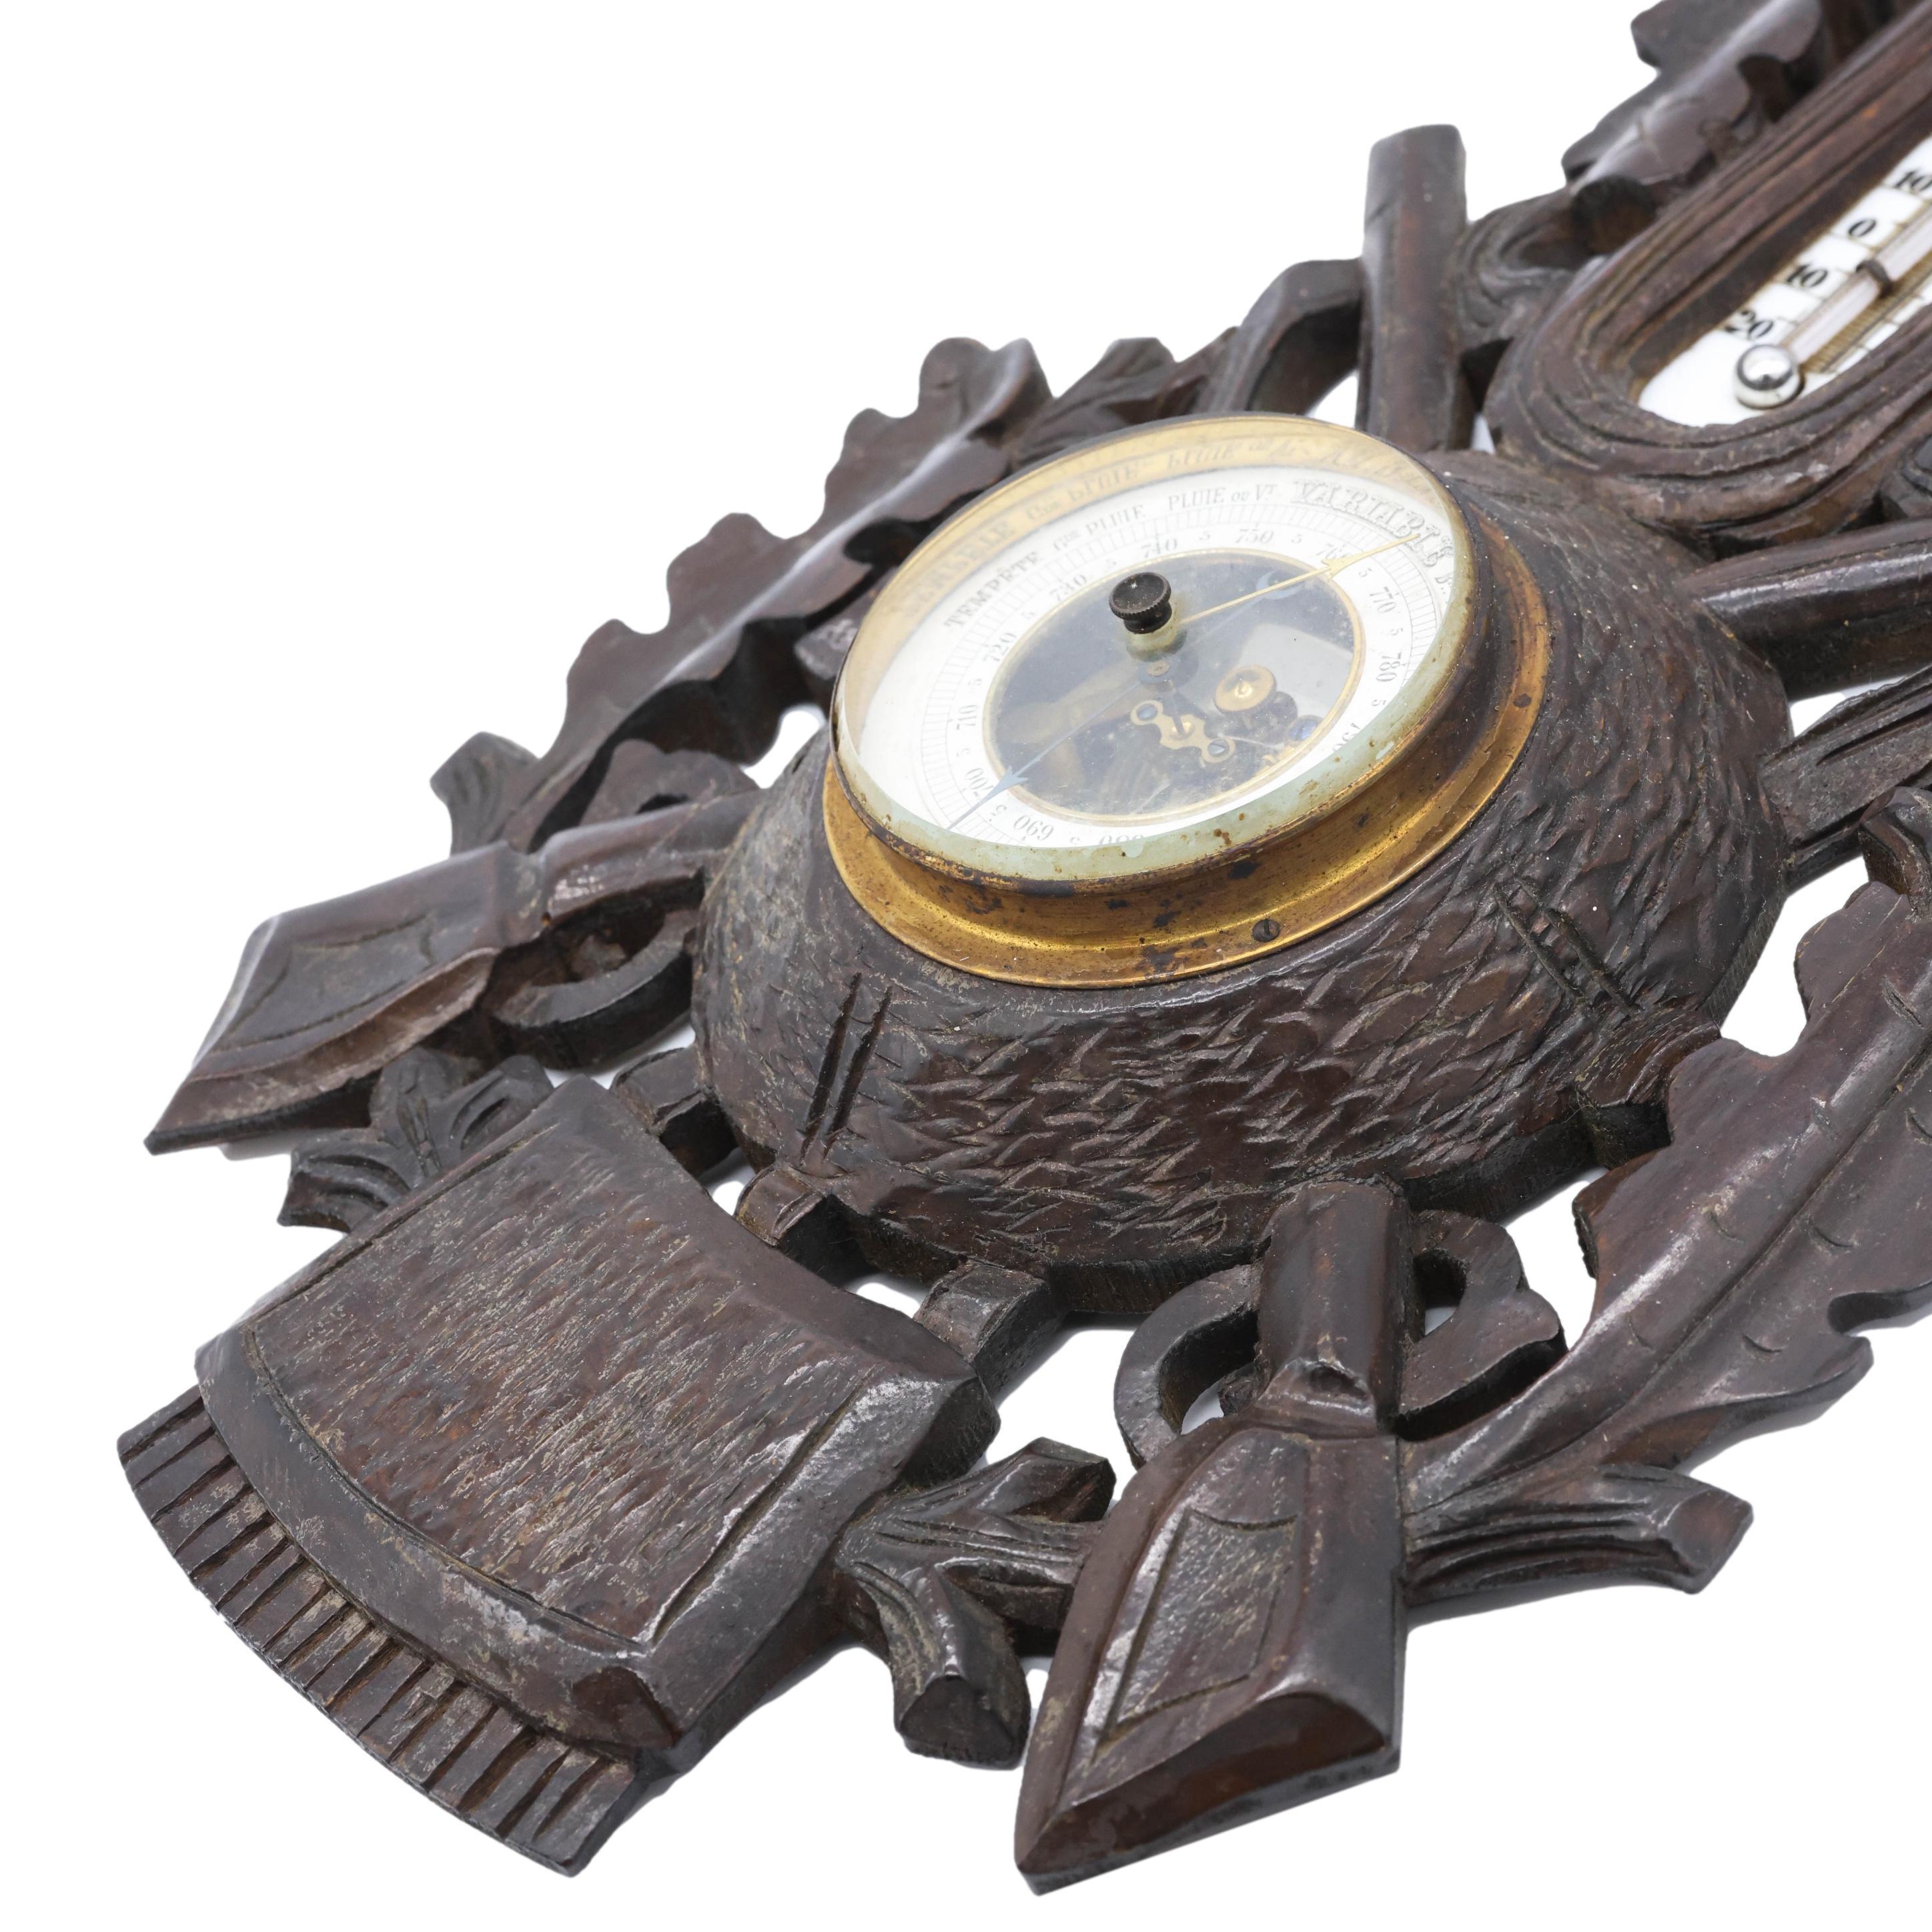 19th Century Black Forest Hand-Carved Barometer with Deer Head, Guns, and Game Bag, ca. 1890